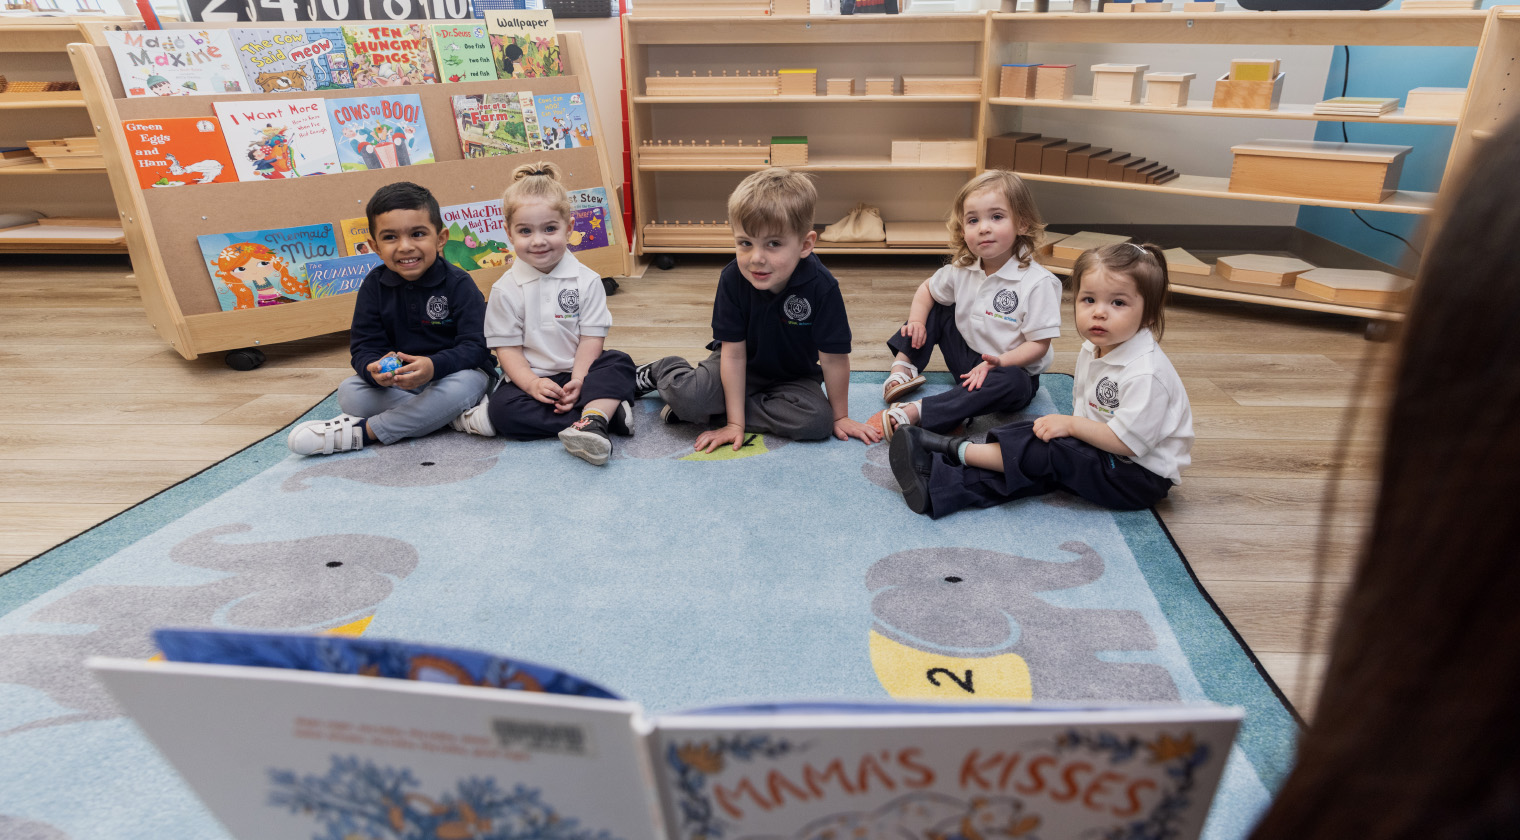 Five young children, of different ages and ethnicities, sit in a row on a light blue area carpet, shelves of books and Montessori materials are behind them, listening to a teacher reading aloud